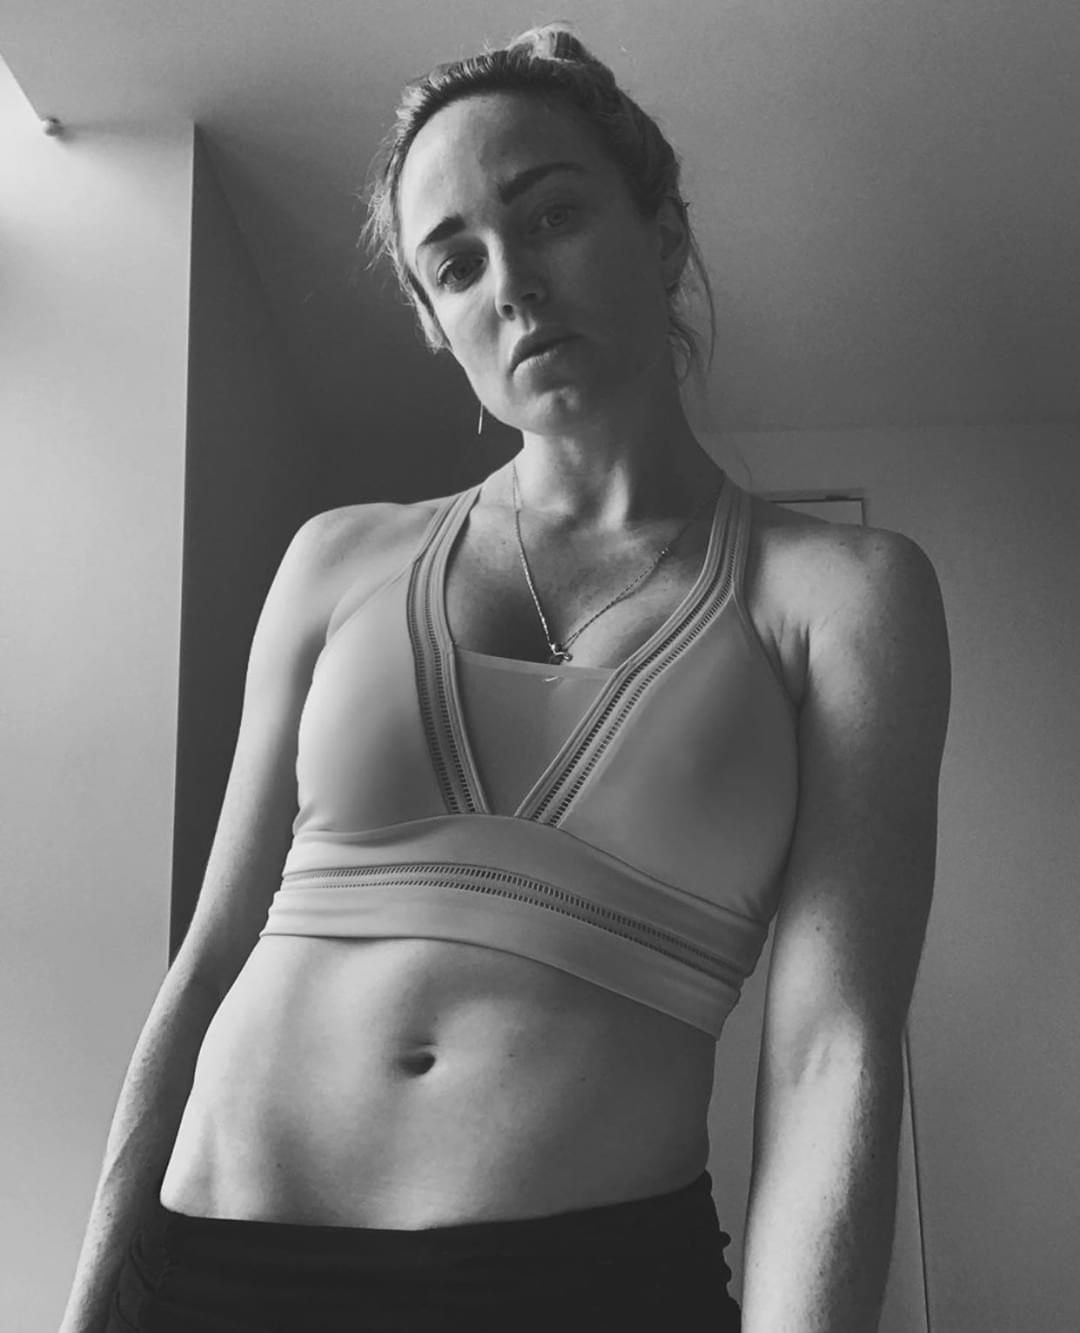 Caity Lotz is so sexy I want to fuck her